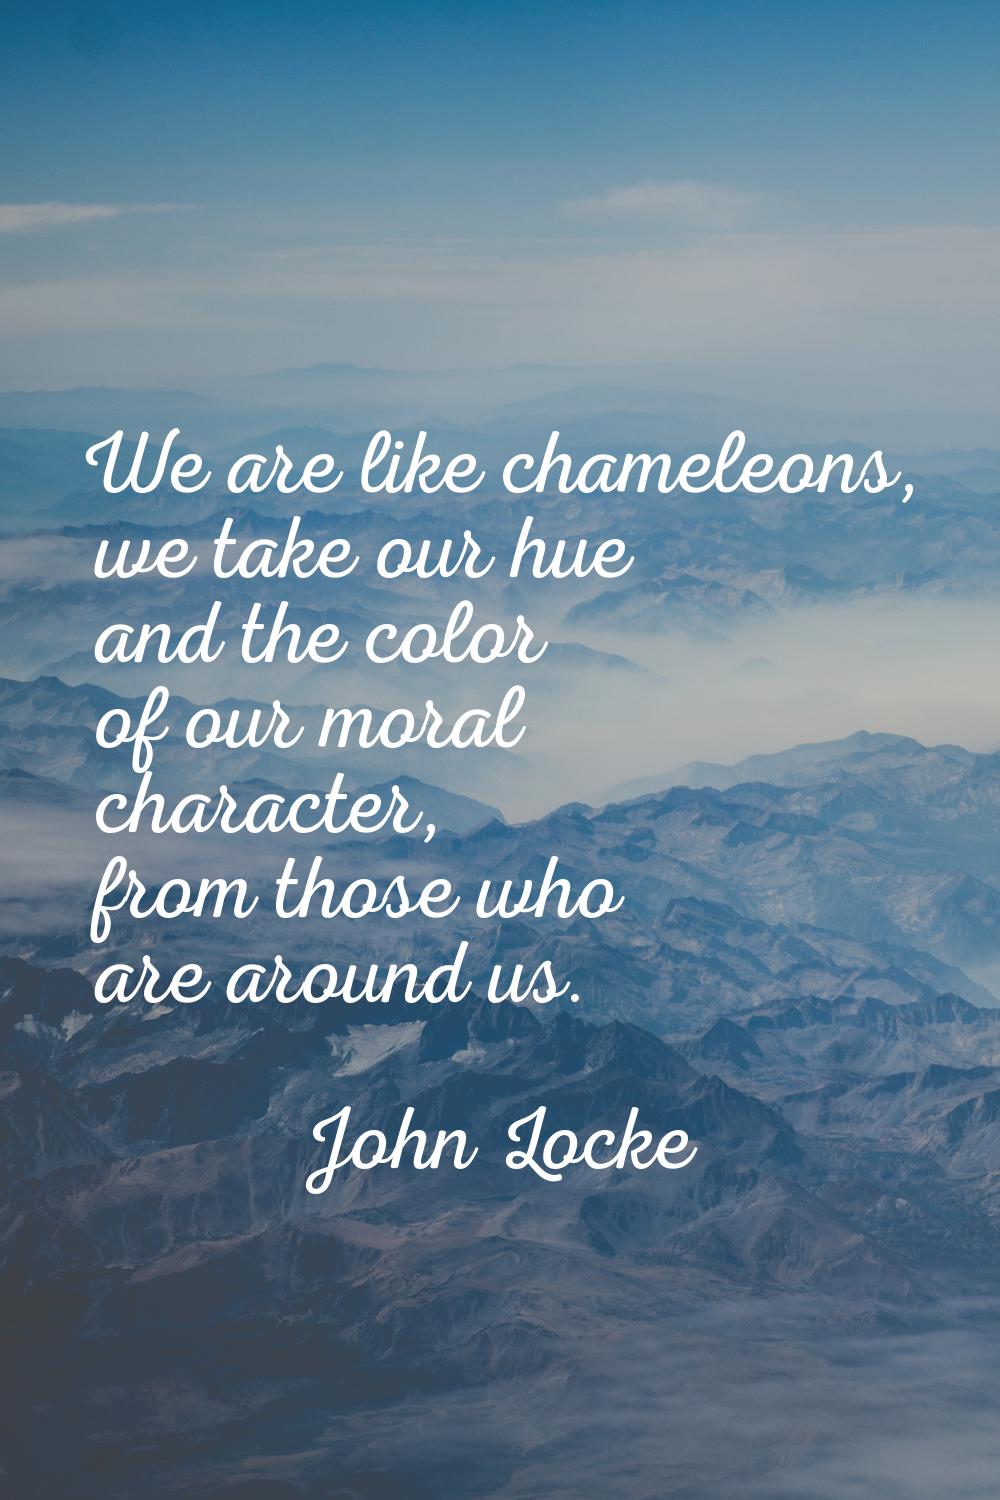 We are like chameleons, we take our hue and the color of our moral character, from those who are ar